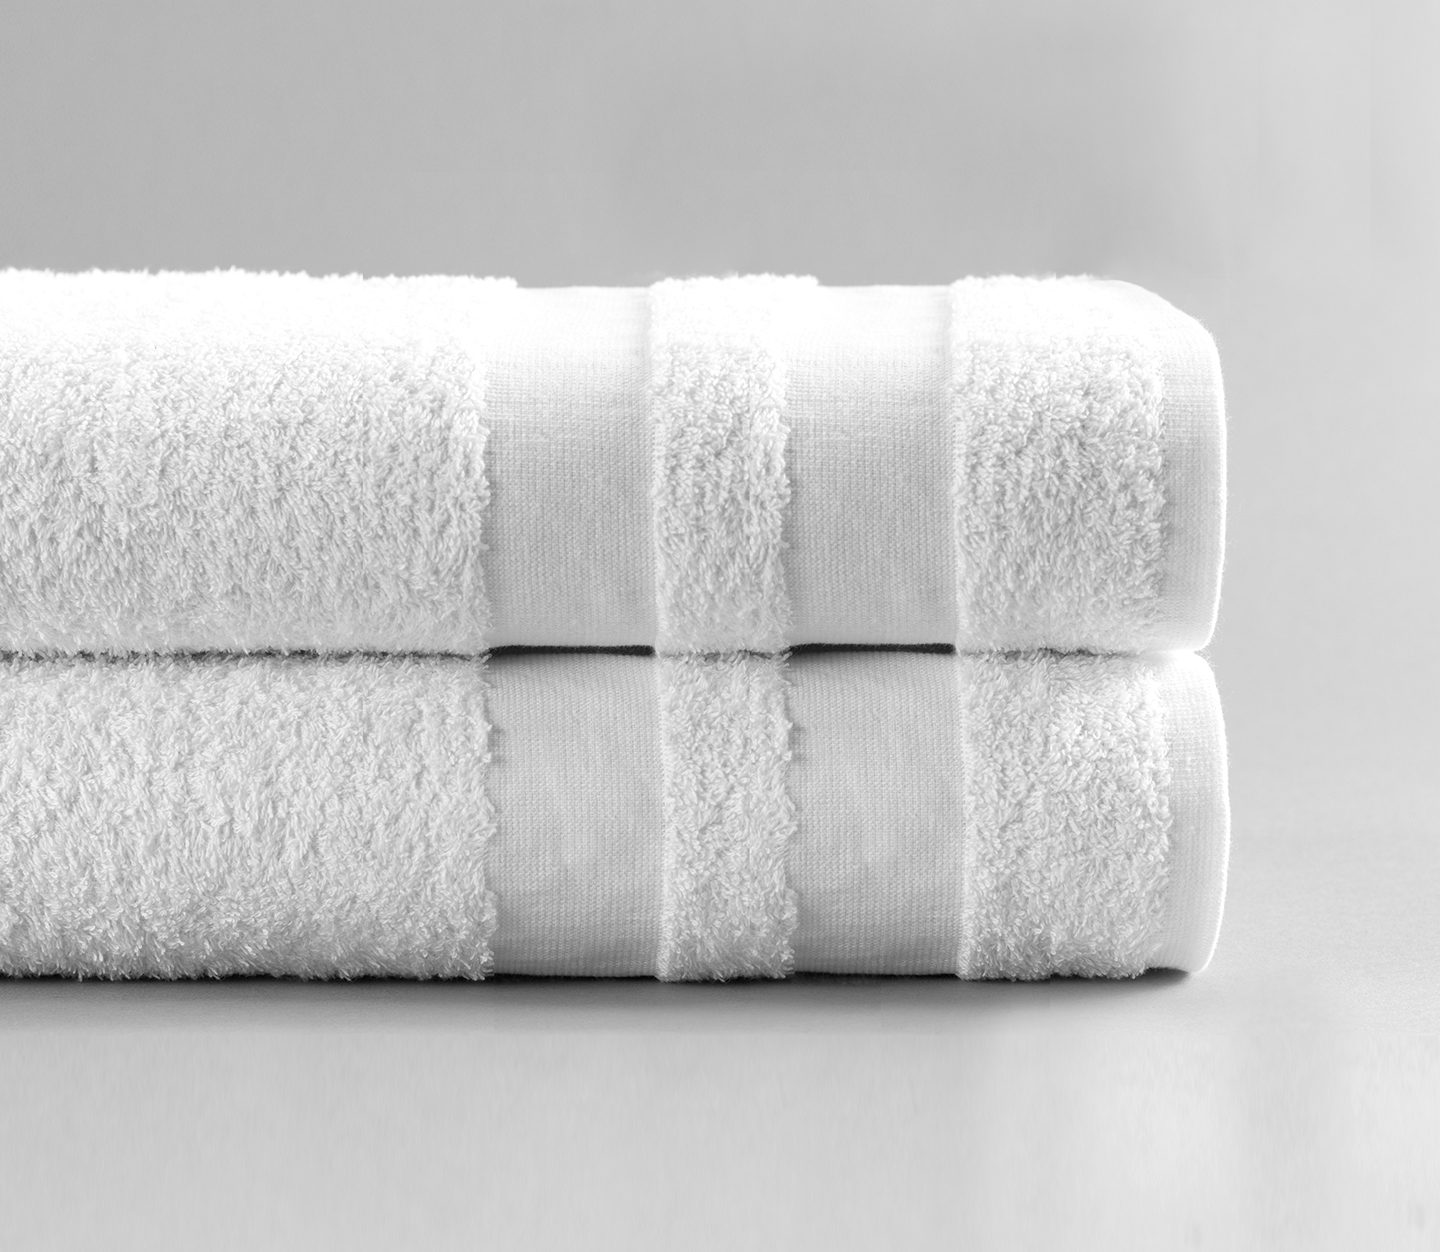 The 16 best places to buy bath towels in 2023, per an expert